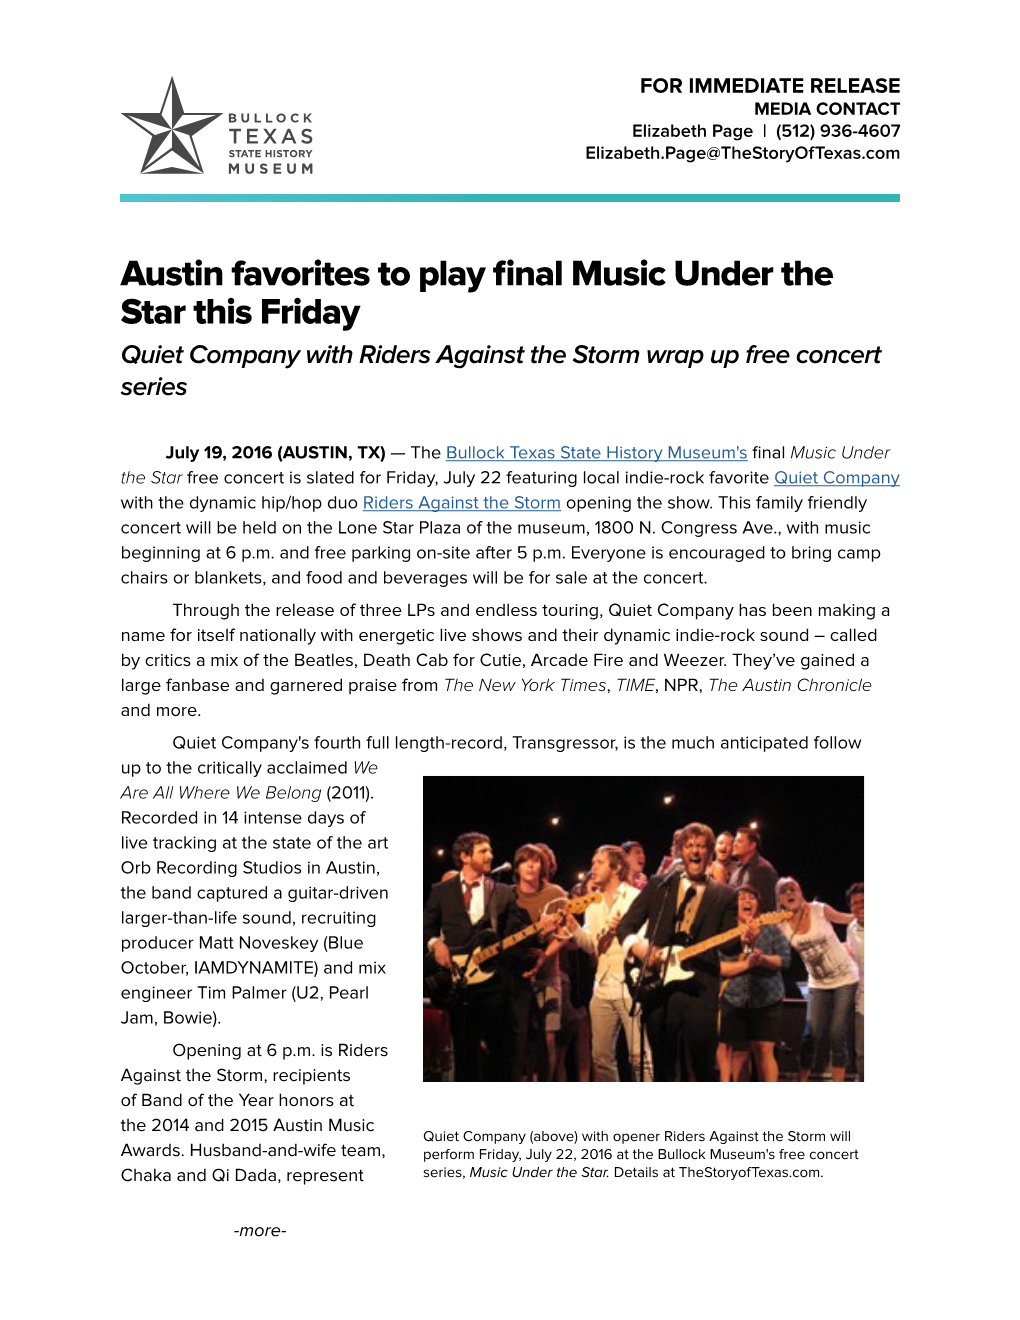 Austin Favorites to Play Final Music Under the Star This Friday Quiet Company with Riders Against the Storm Wrap up Free Concert Series